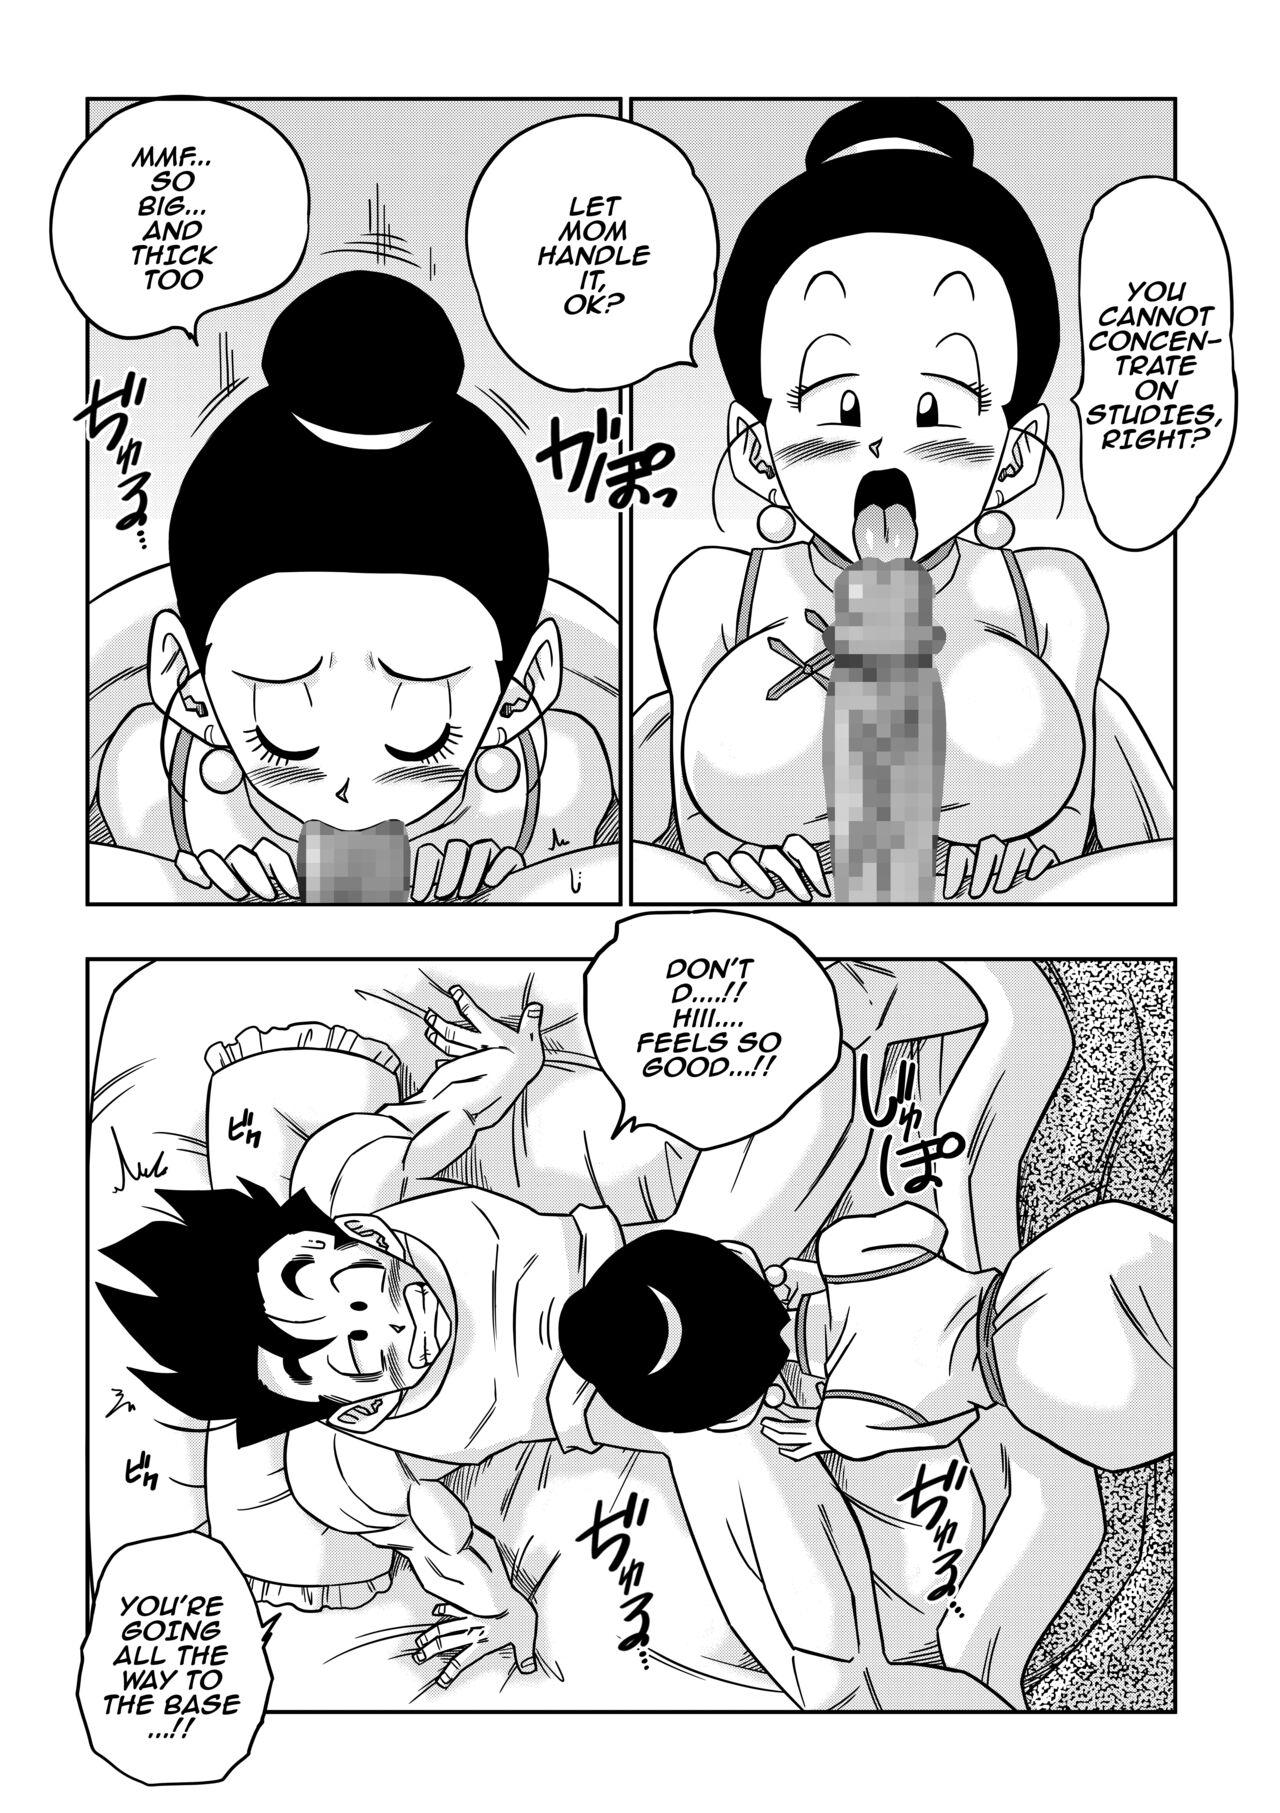 Girl LOVE TRIANGLE Z PART 5 - Dragon ball z Oiled - Page 5